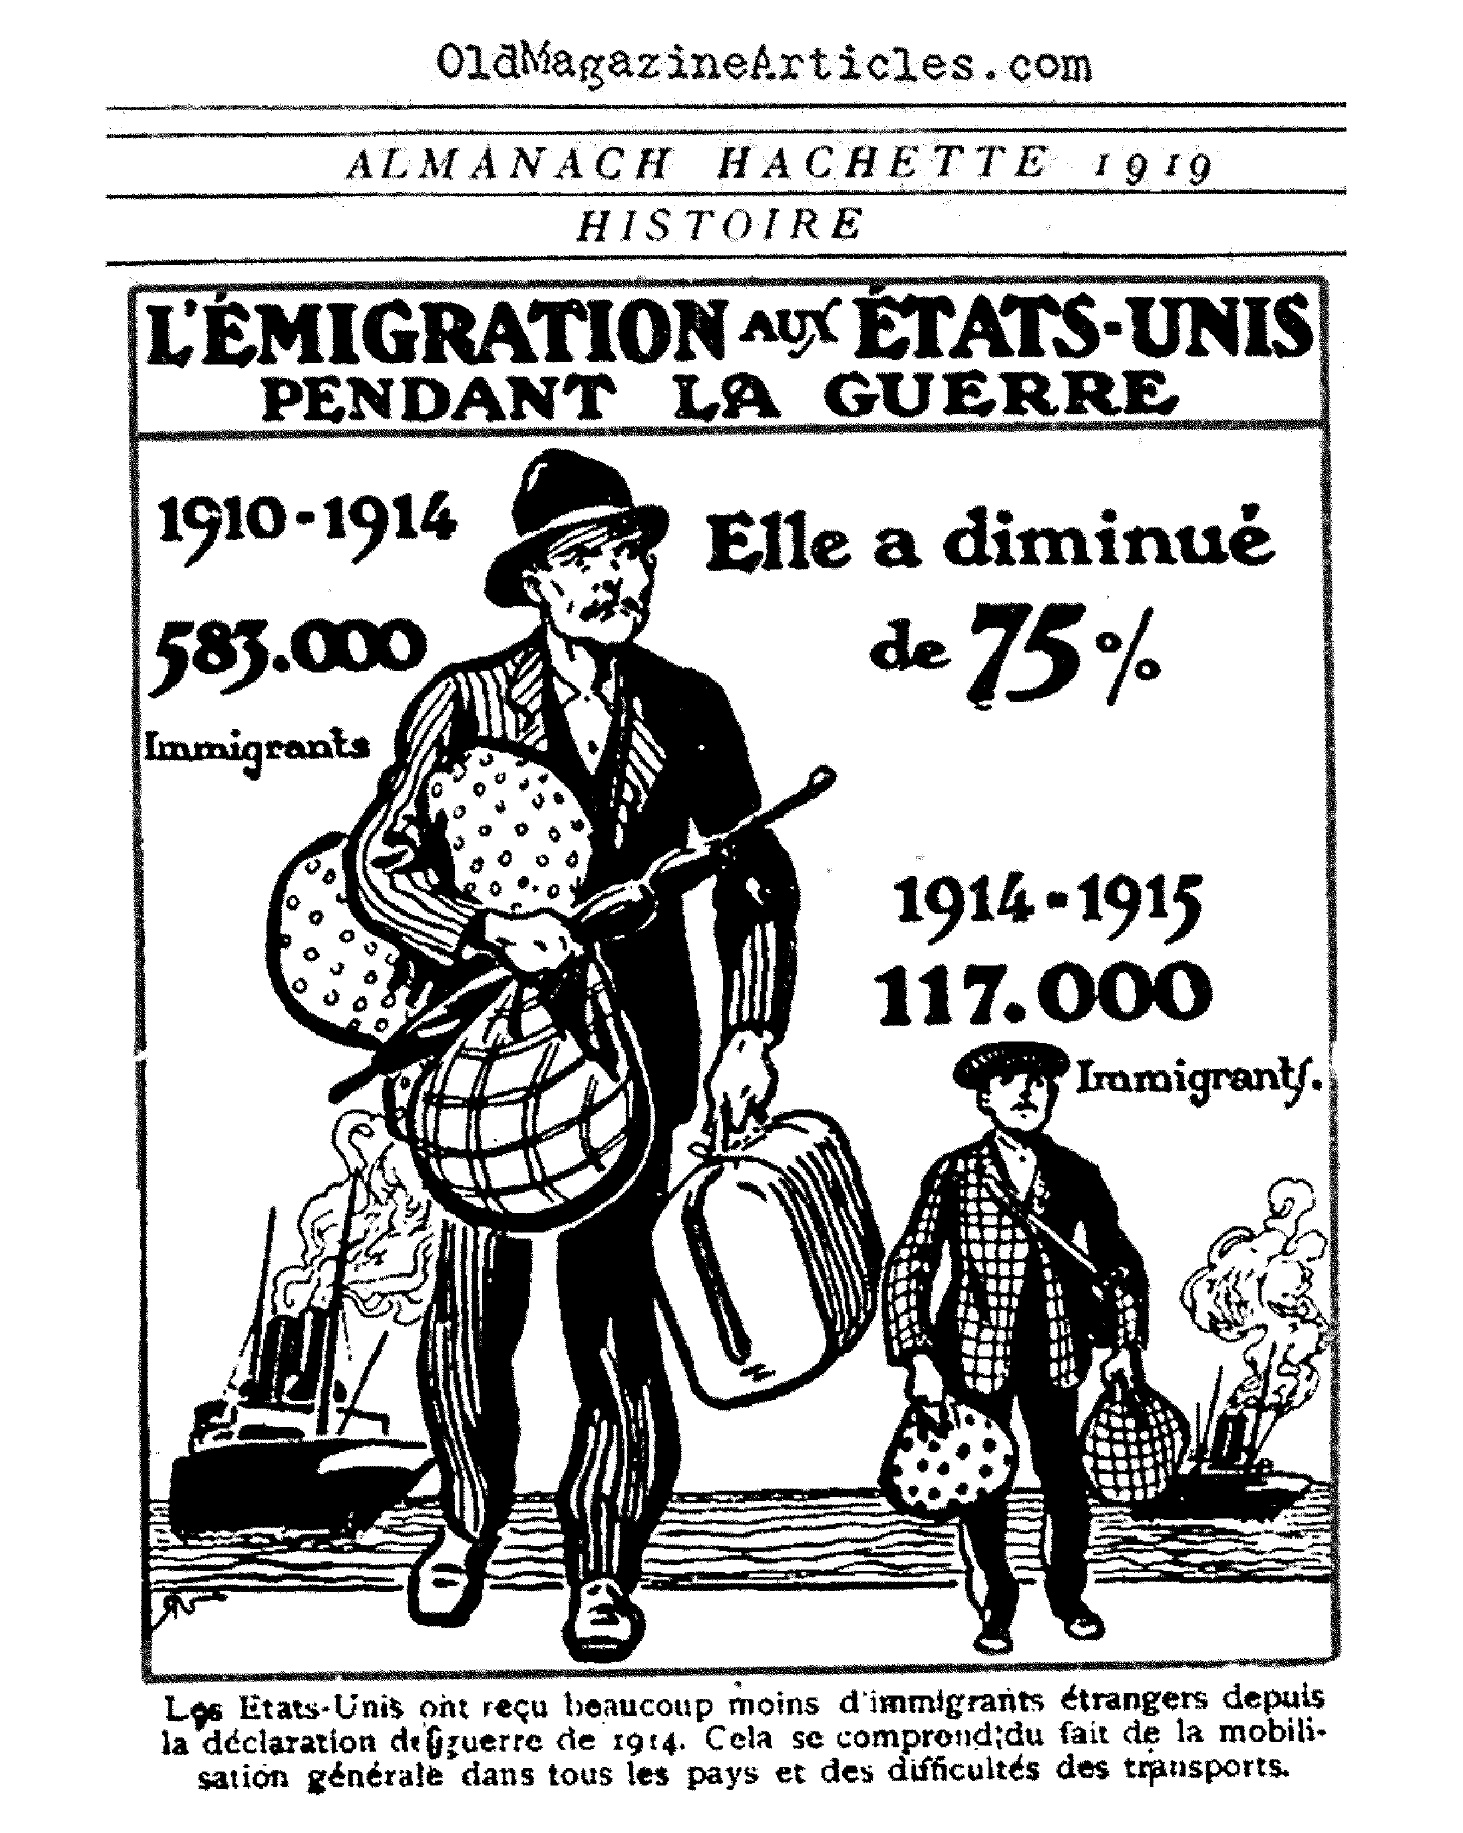 Reduced French Immigration (Almanach Hachette, 1919)